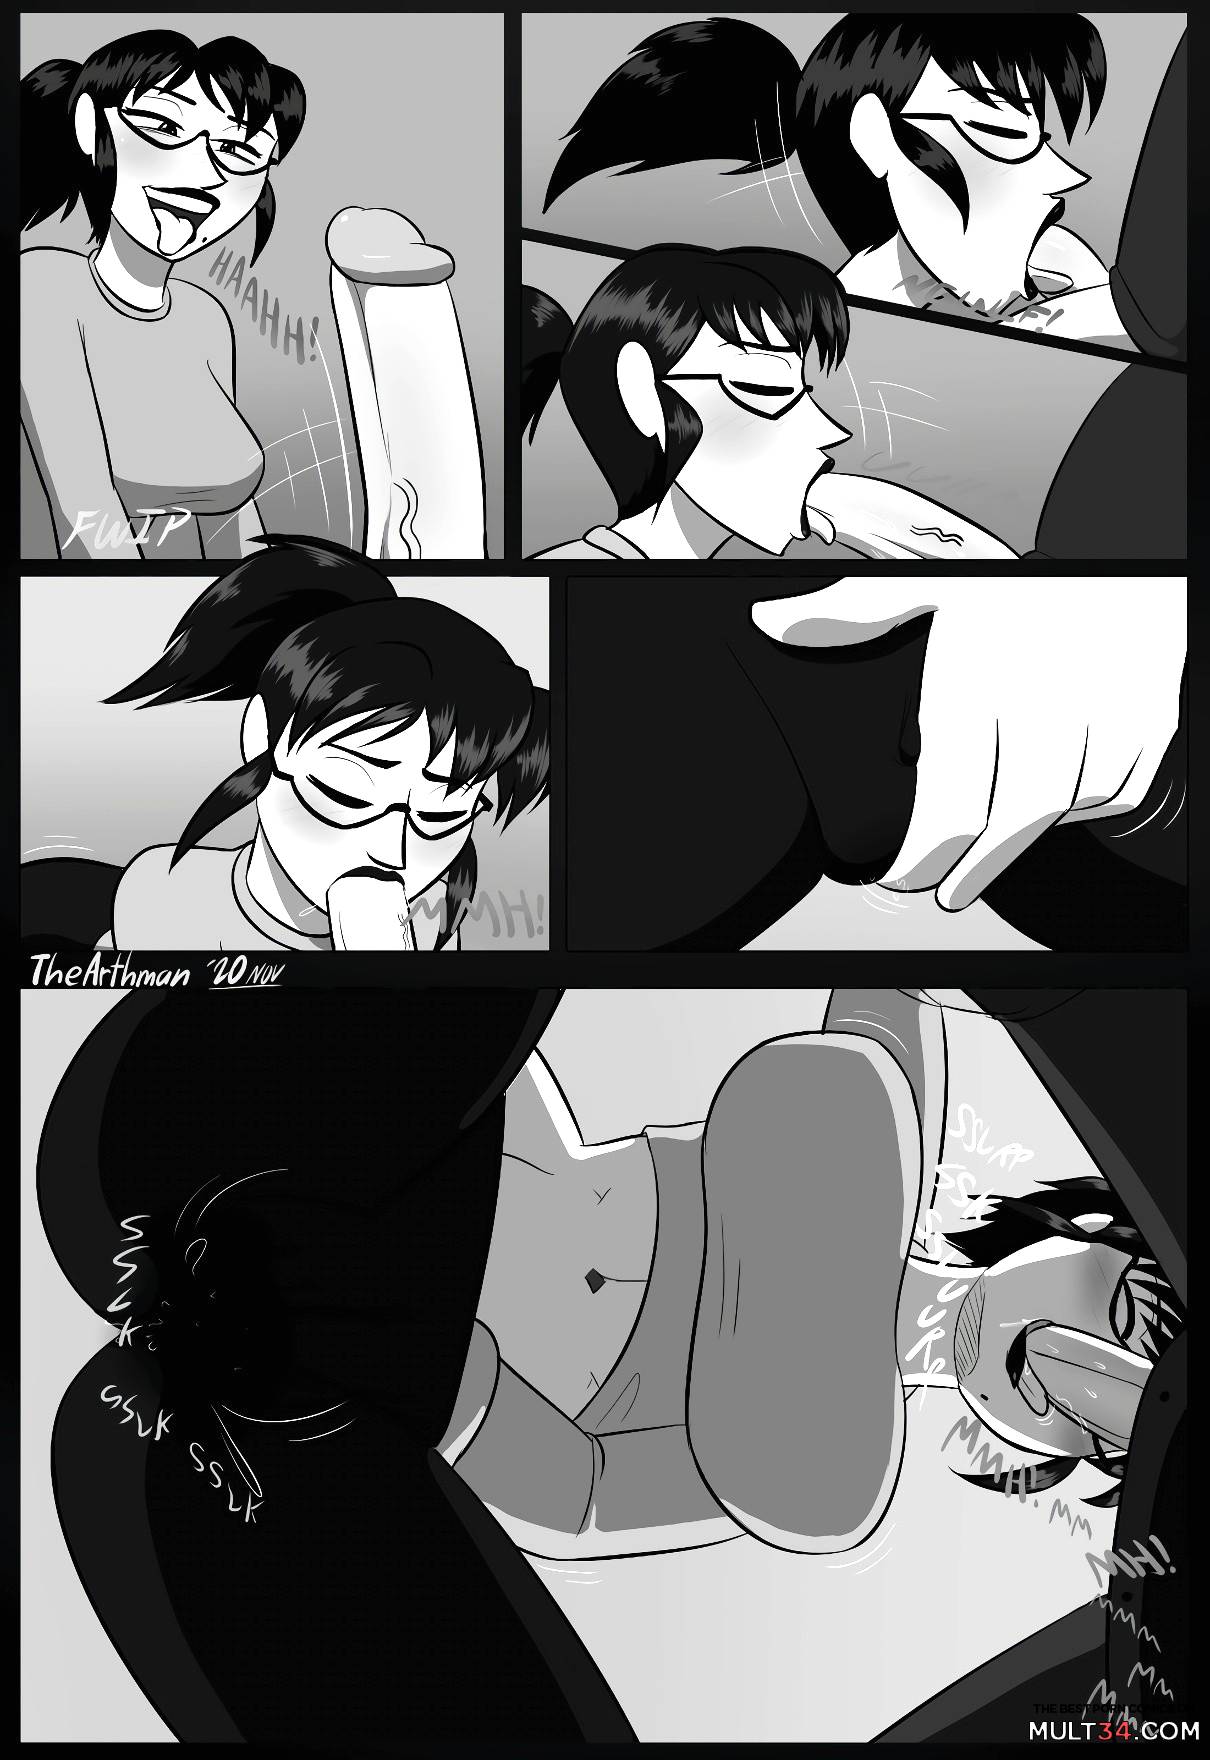 Dirtwater 4 - The Beast Within page 9